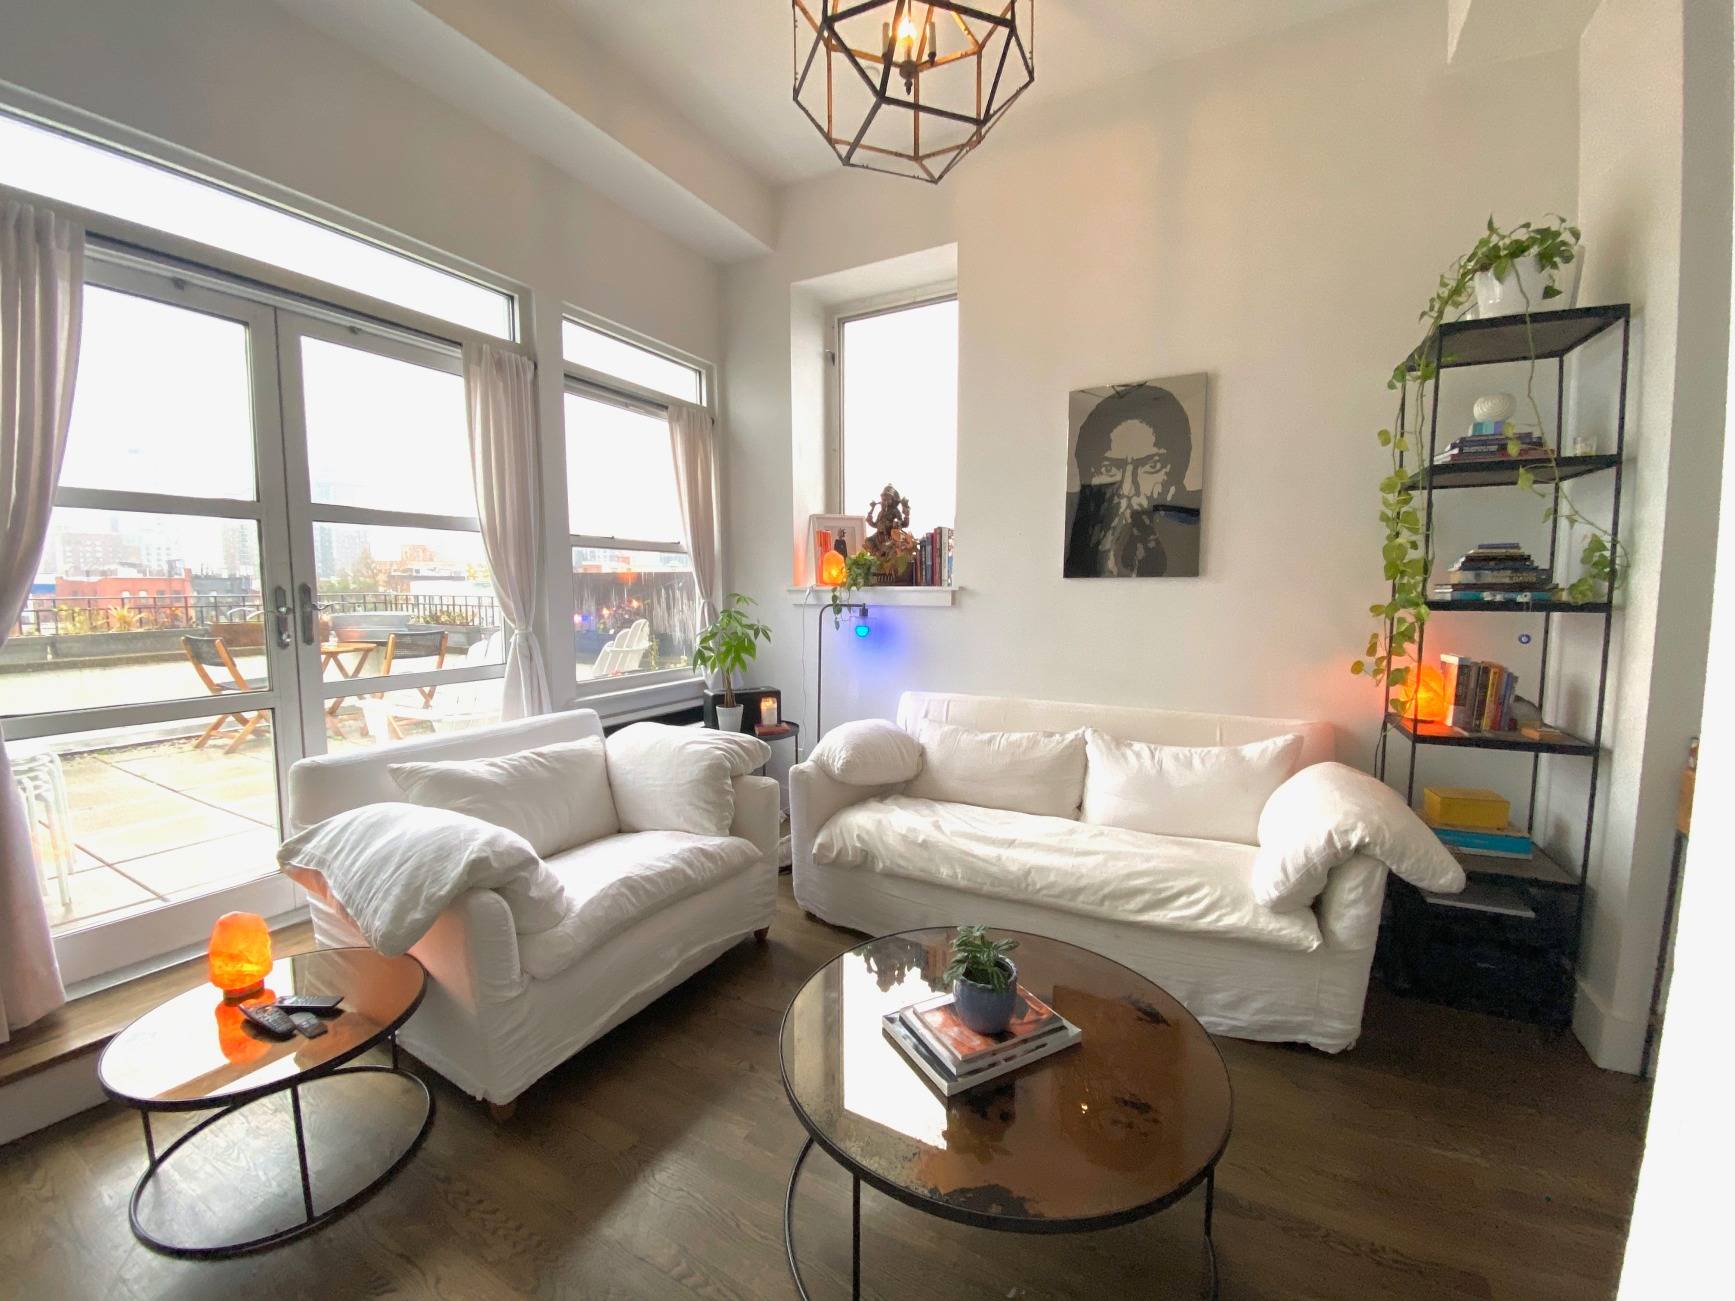 Welcome to this beautifully furnished 2 bed 2 bath PENTHOUSE at 114 Ridge Street.